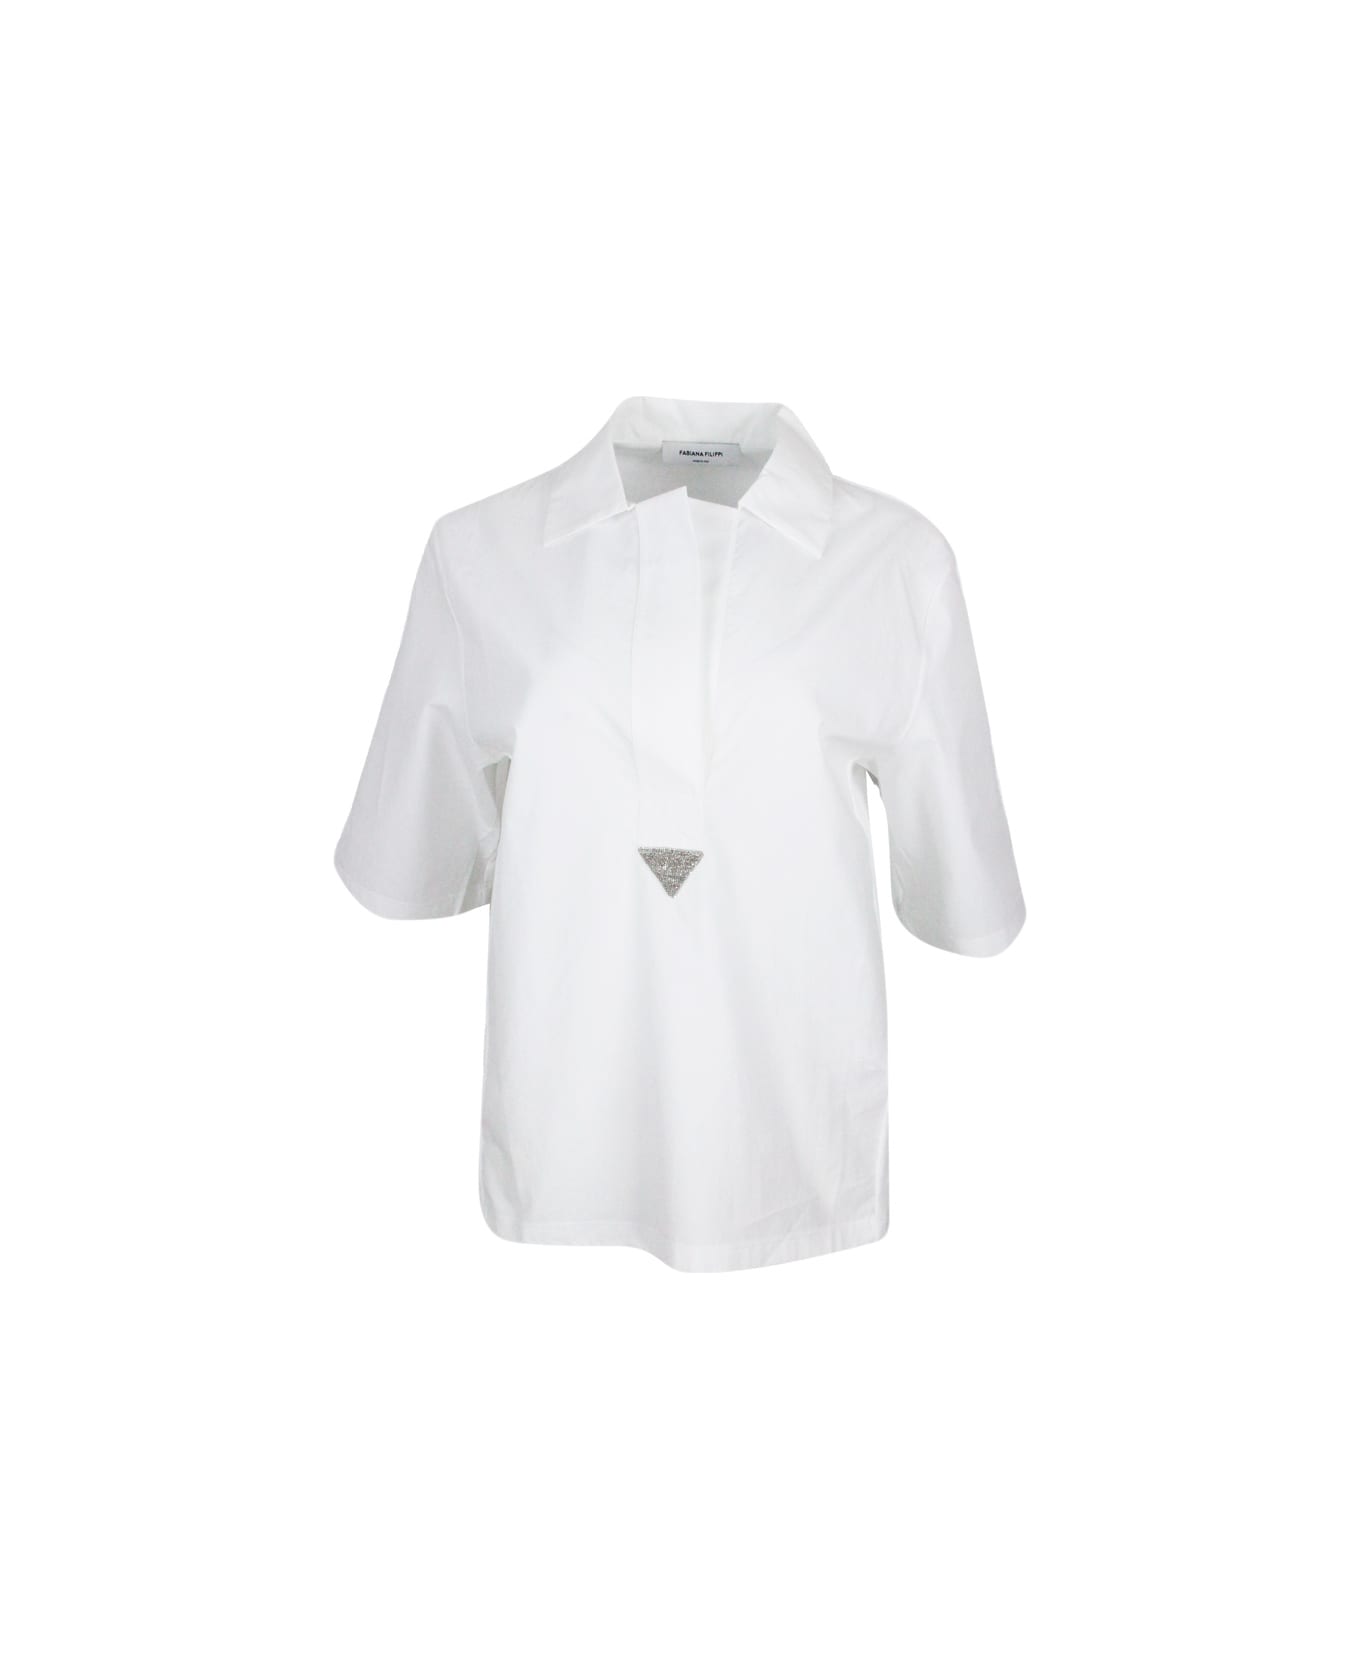 Fabiana Filippi Short-sleeved Polo T-shirt With Collar Made Of Jersey Cotton On The Front And Ribbed On The Back. Point Of Light On The Neckline - White